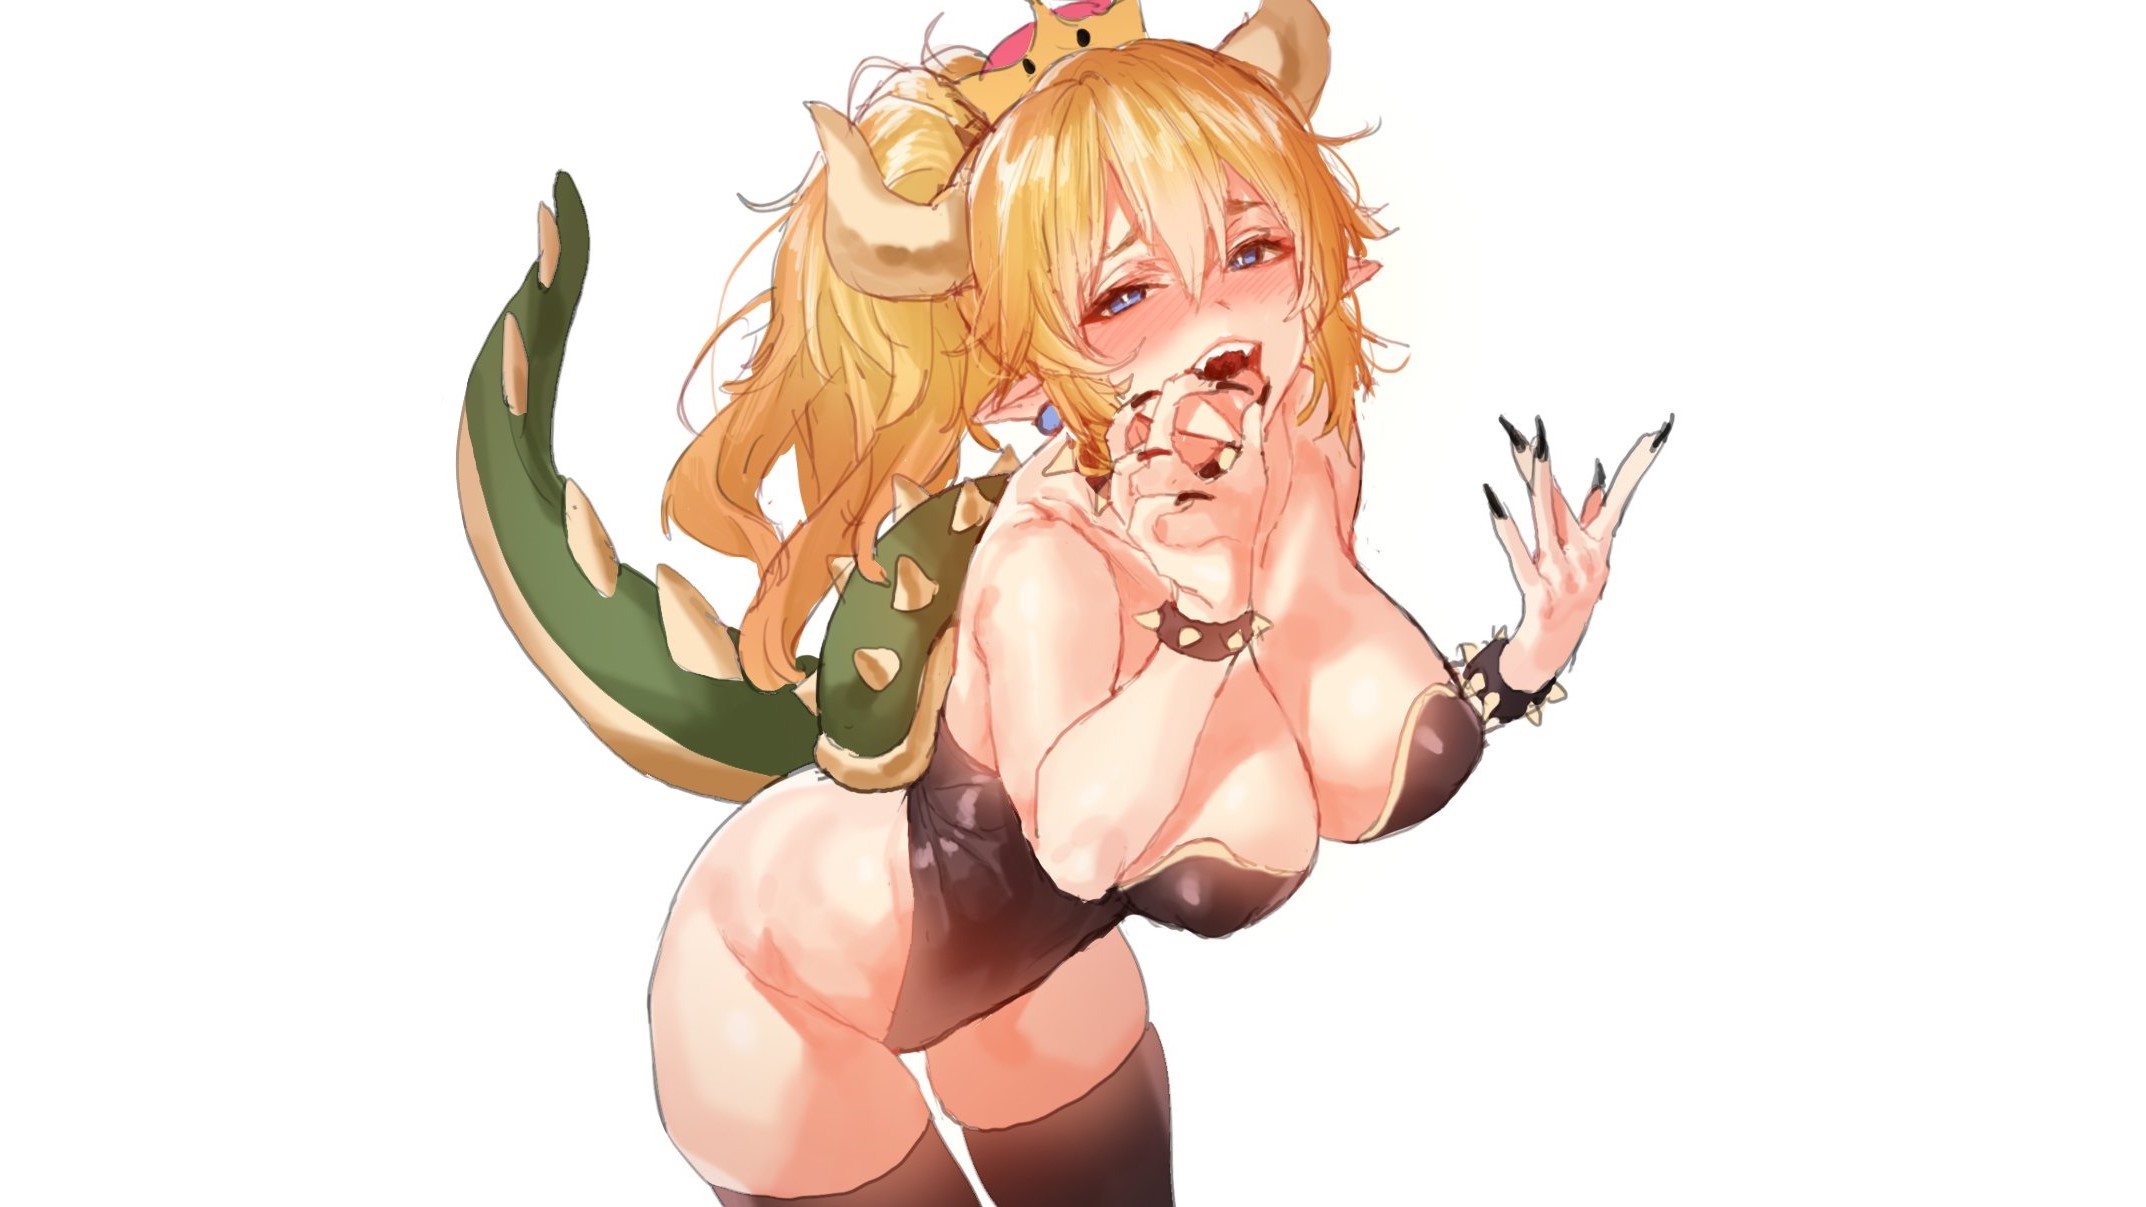 Anime 2146x1207 mx2j Bowsette Mario Nintendo anime anime girls women video game girls simple background blonde long hair horns looking at viewer blue eyes blushing open mouth tongue out suggestive cleavage boobs big boobs crown leotard collar thighs thick thigh thigh-highs tail